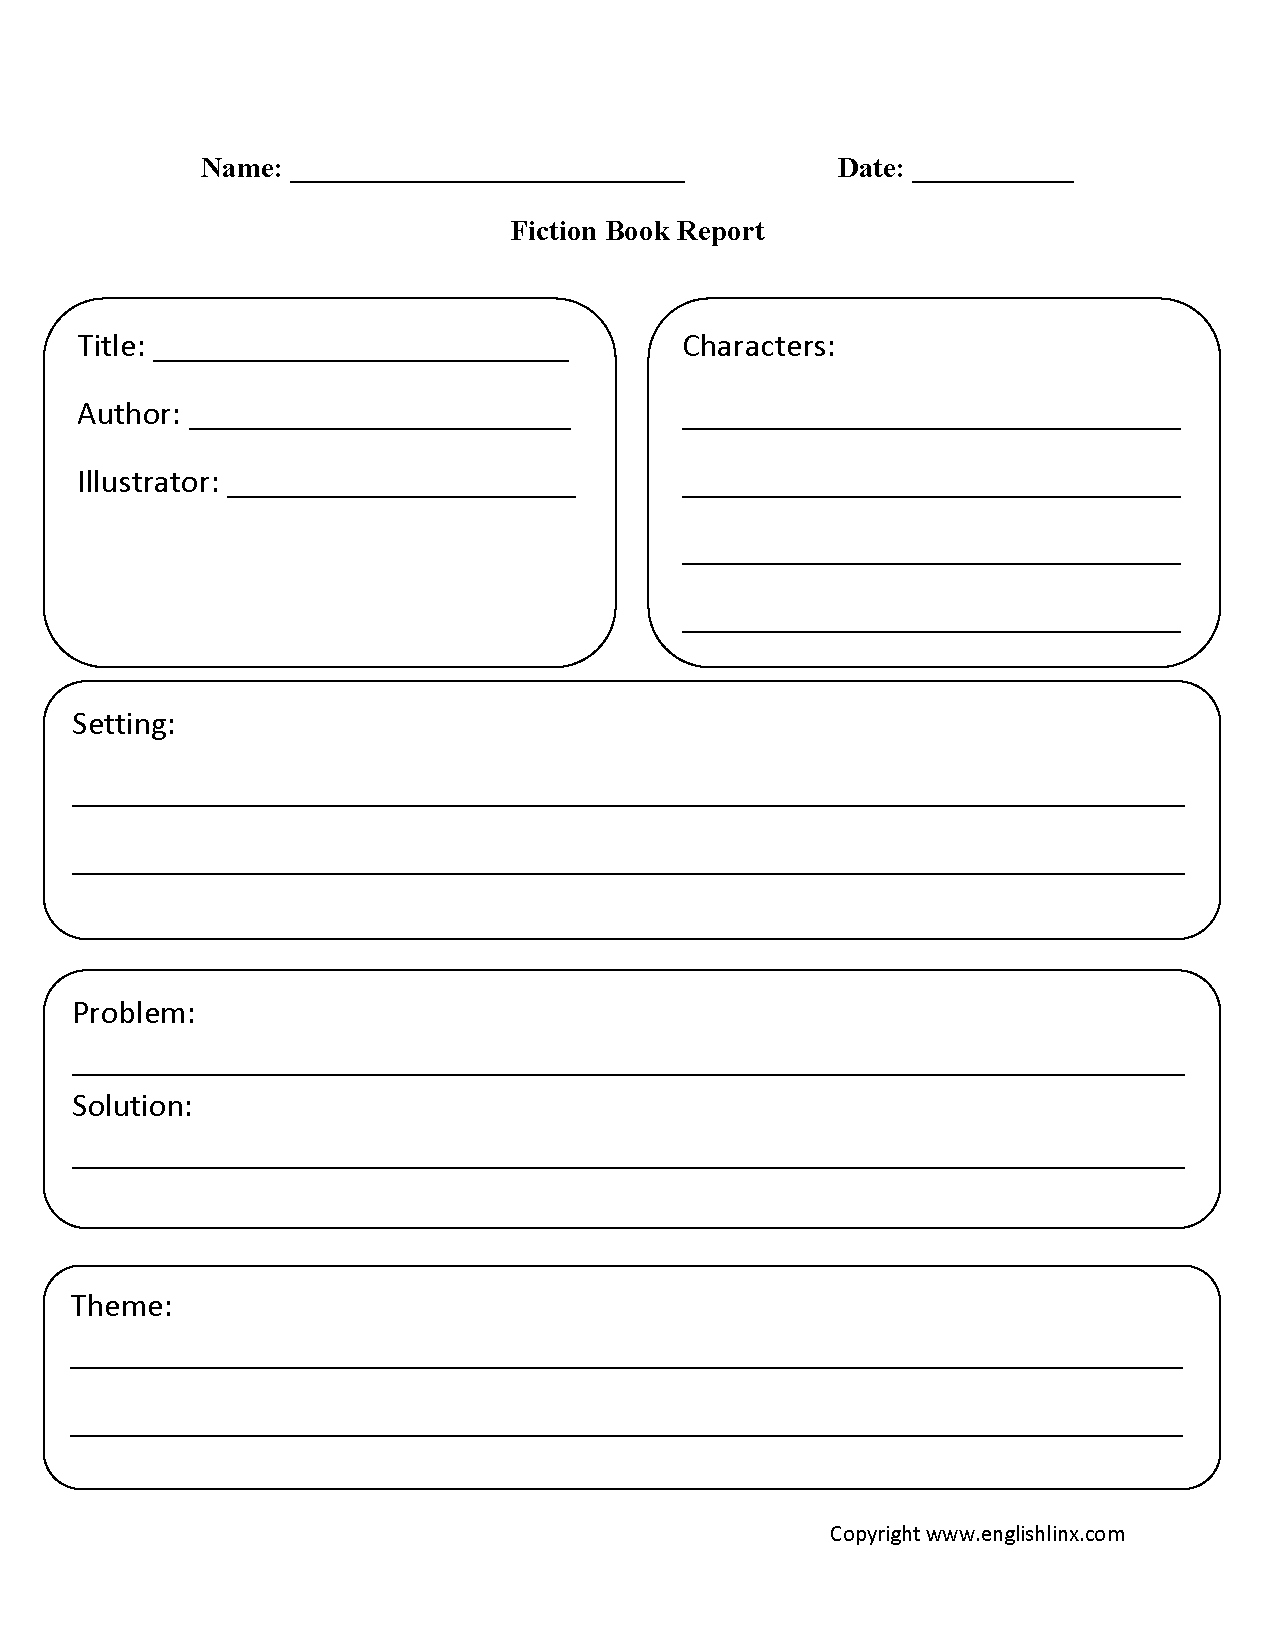 Englishlinx | Book Report Worksheets Throughout Biography Book Report Template